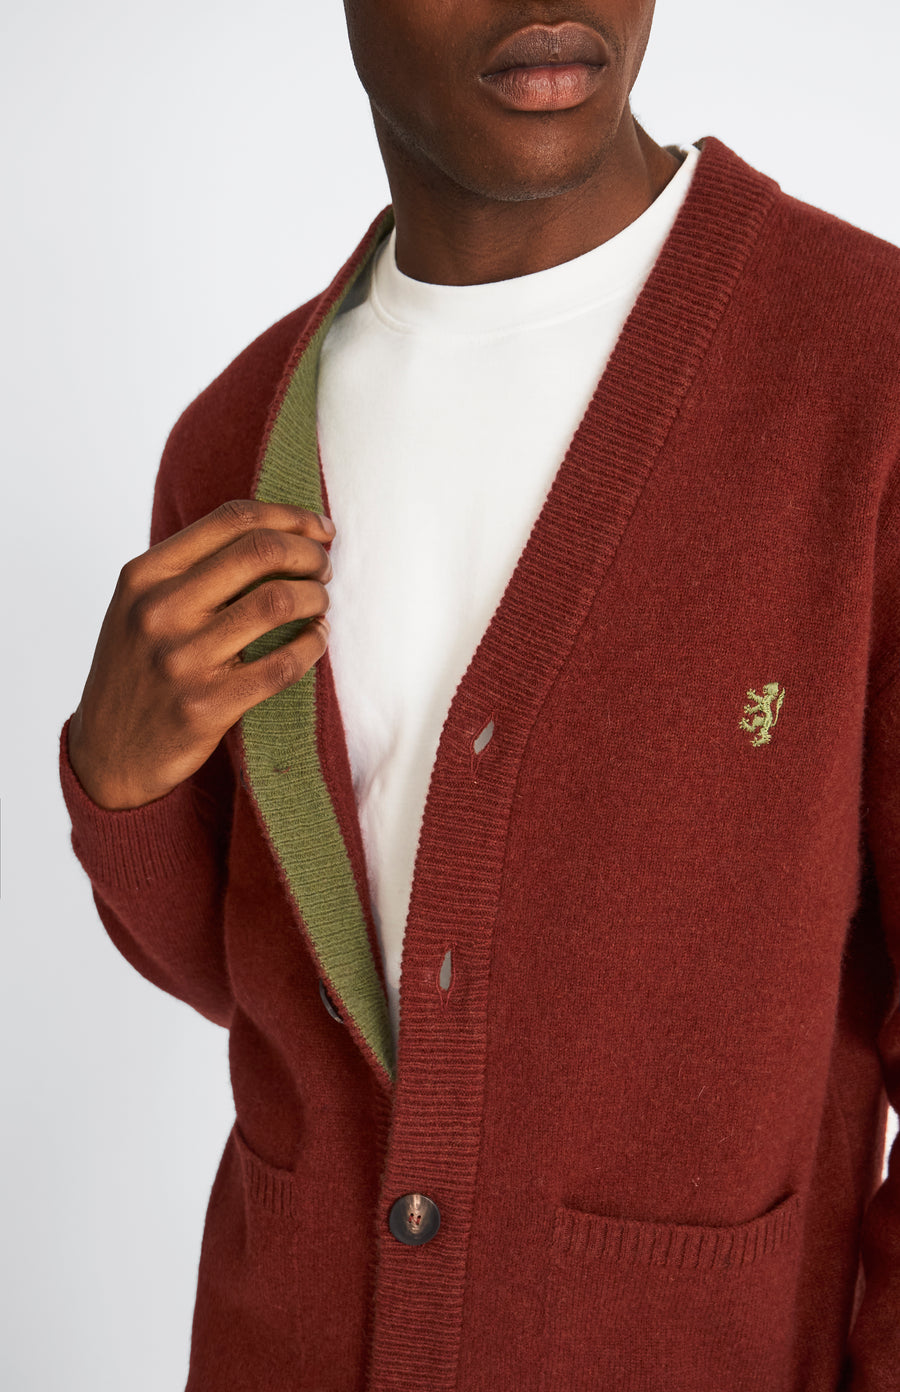 Pringle Men's lambswool V Neck Cardigan in Red Rust & Mineral Green showing contrast trims